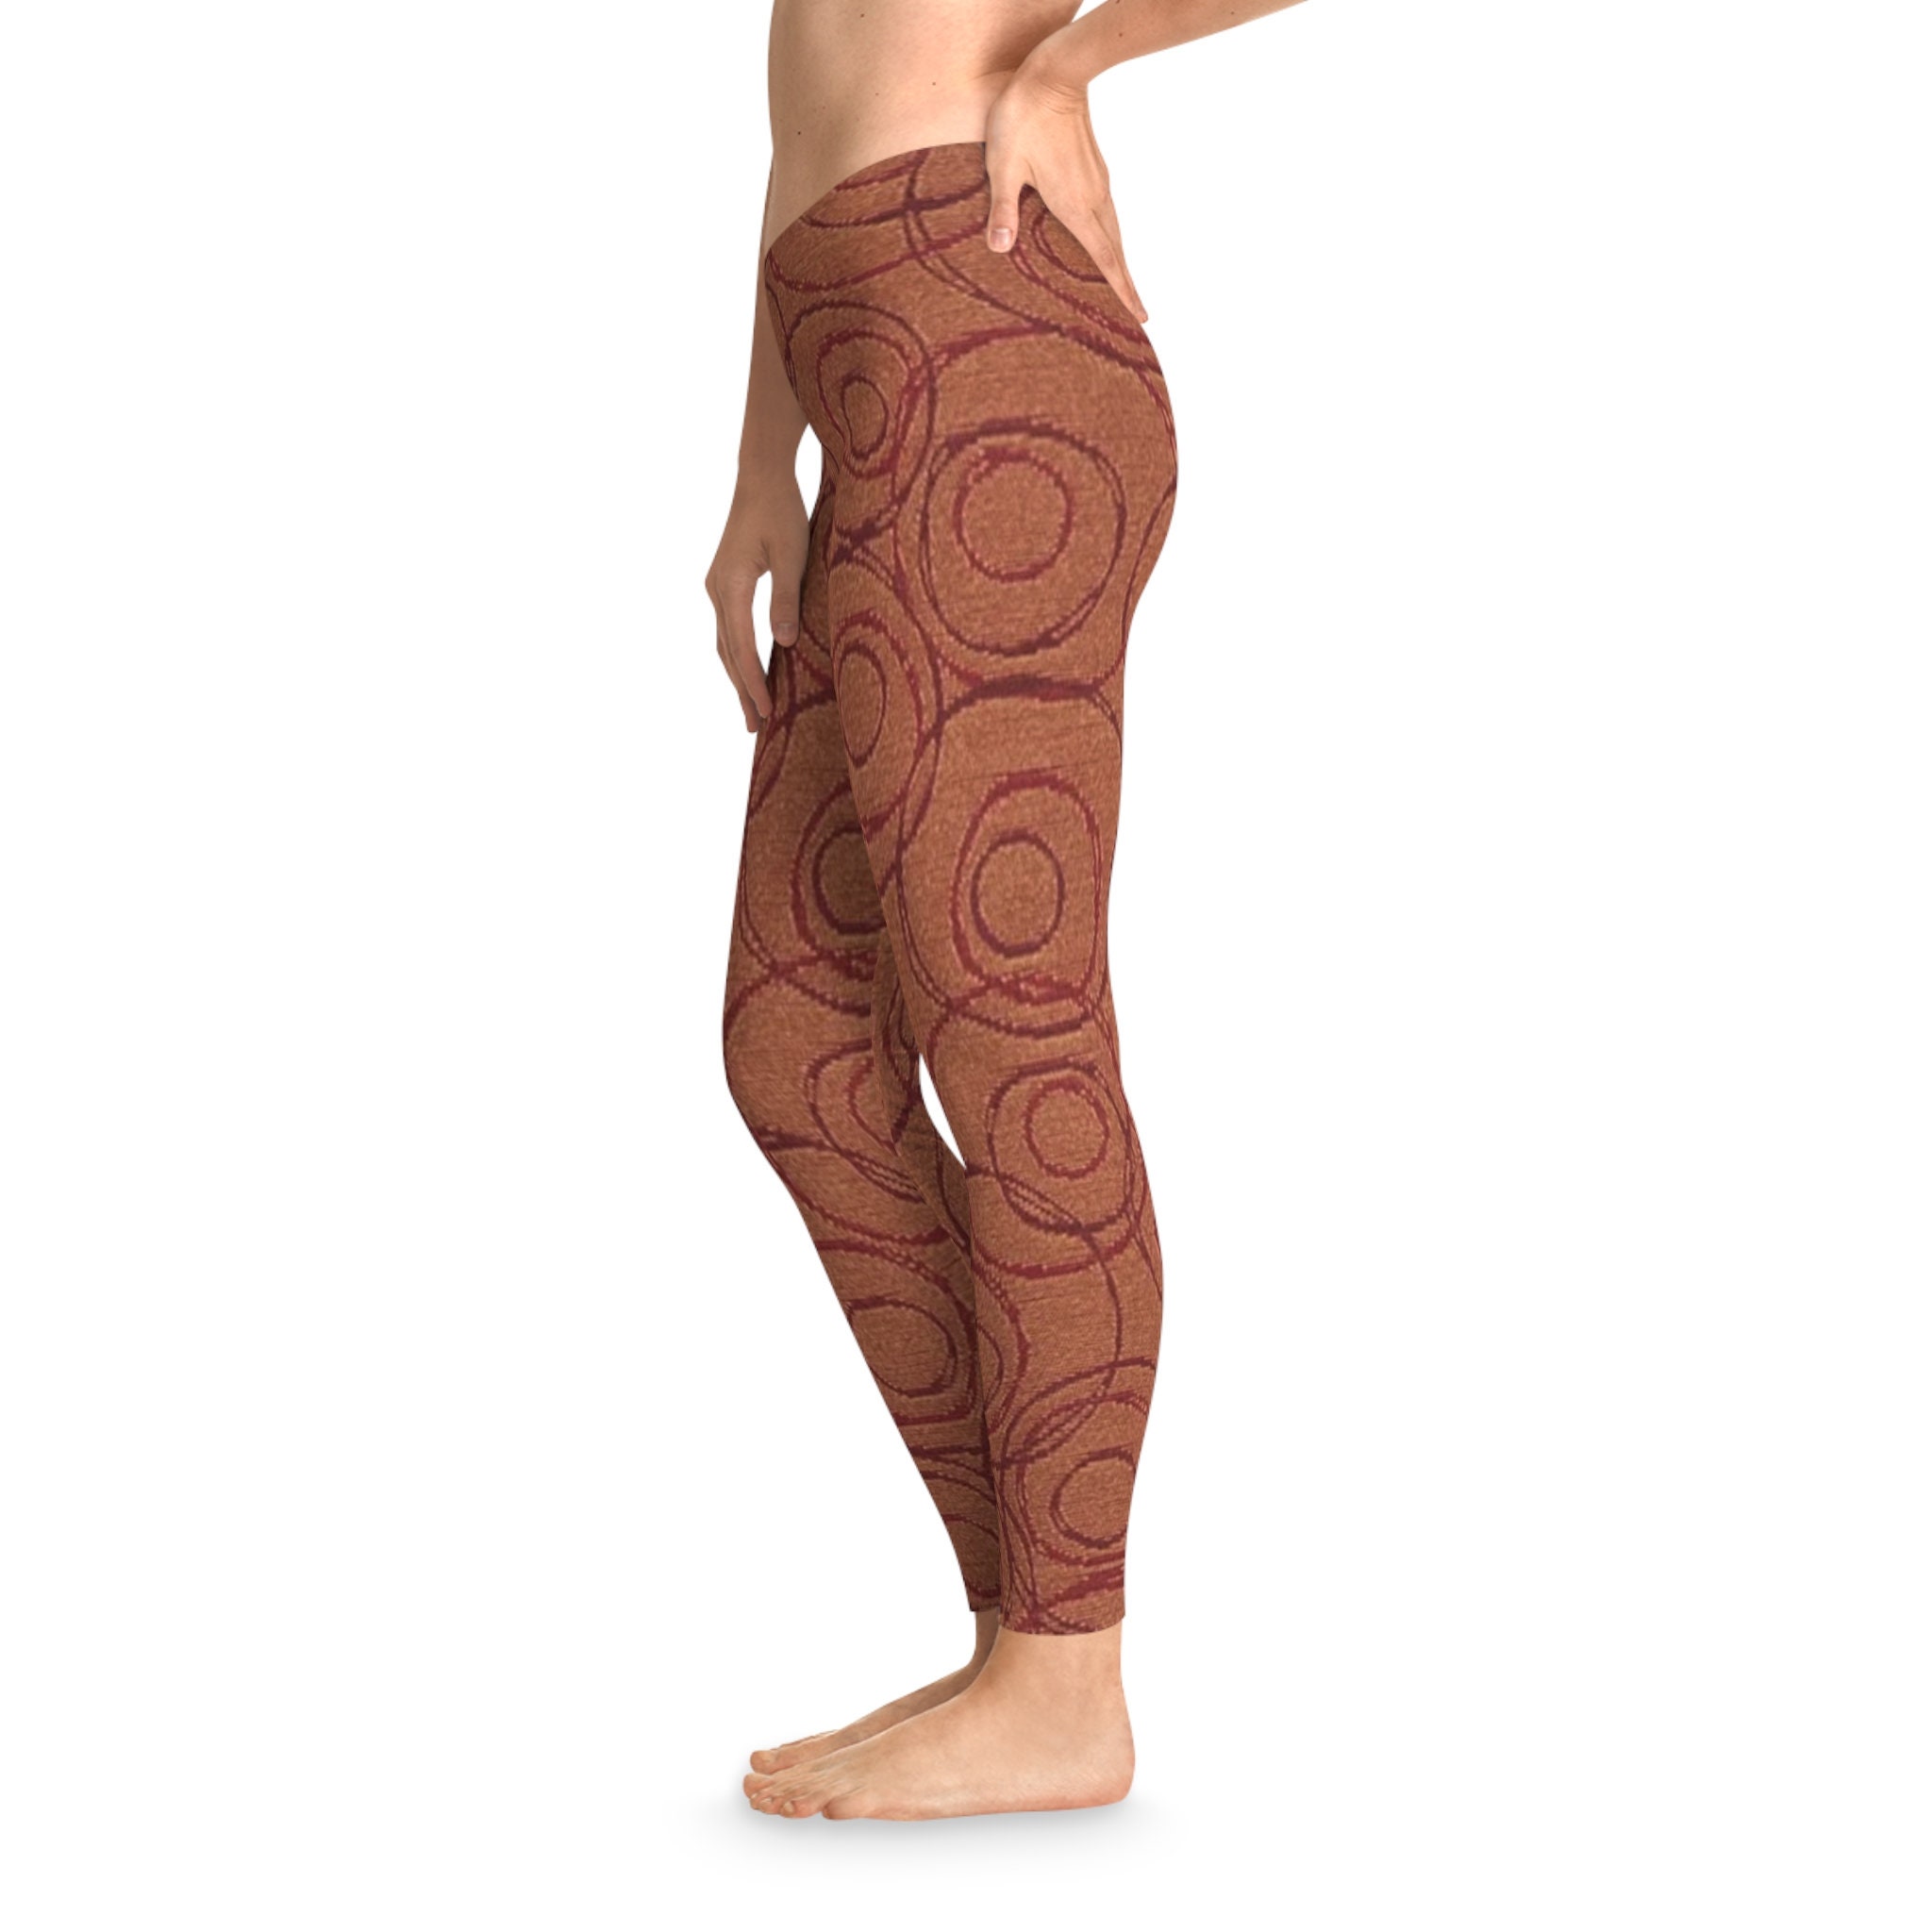 Soft Stretchy Leggings With Circle Design, Yoga Pants, Womens